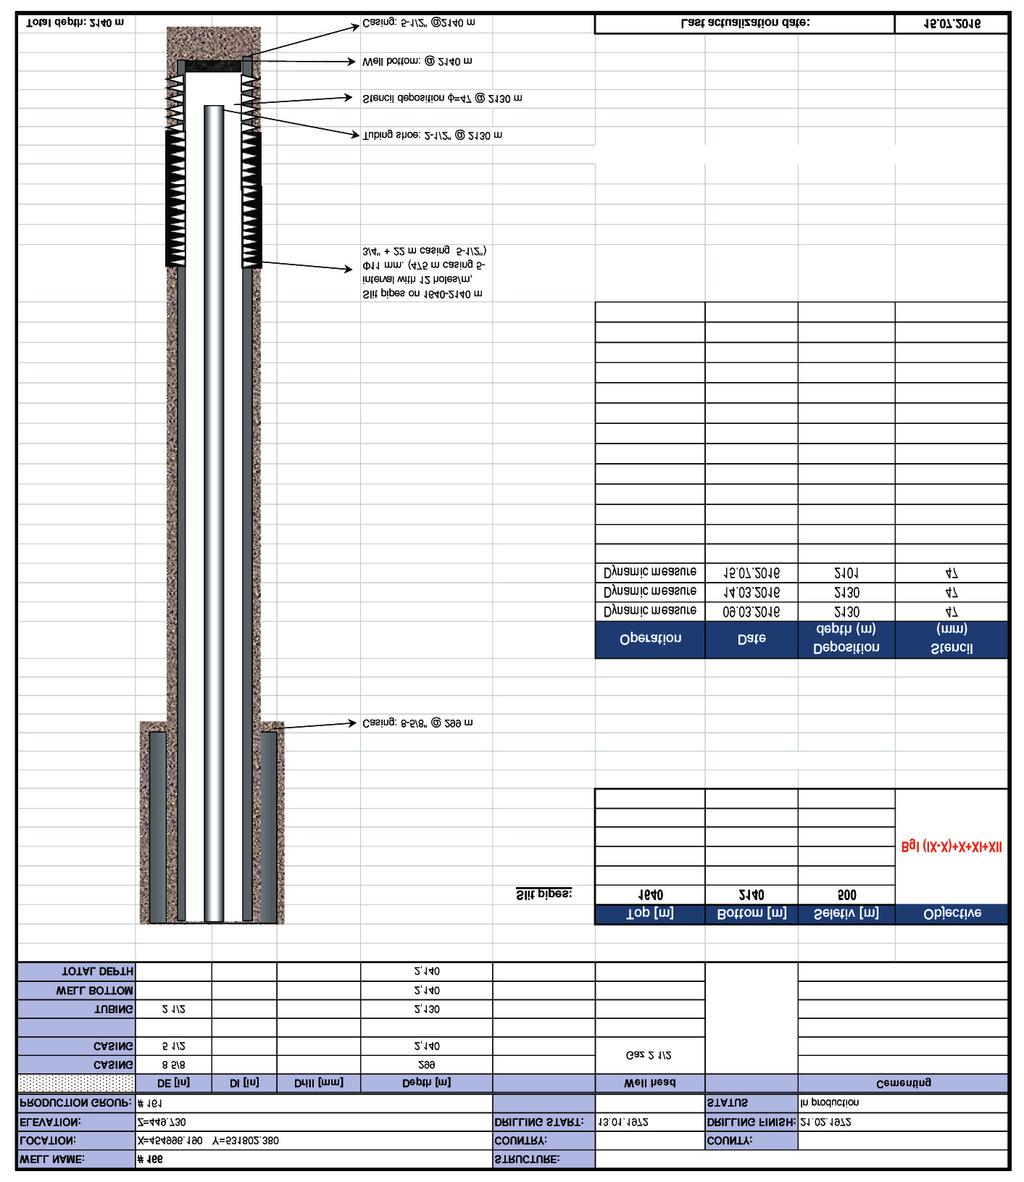 The extraction operator will monitor the well dynamic pressures and liquid impurities. After the operation the wellbore has the following schematic (Fig. 6)